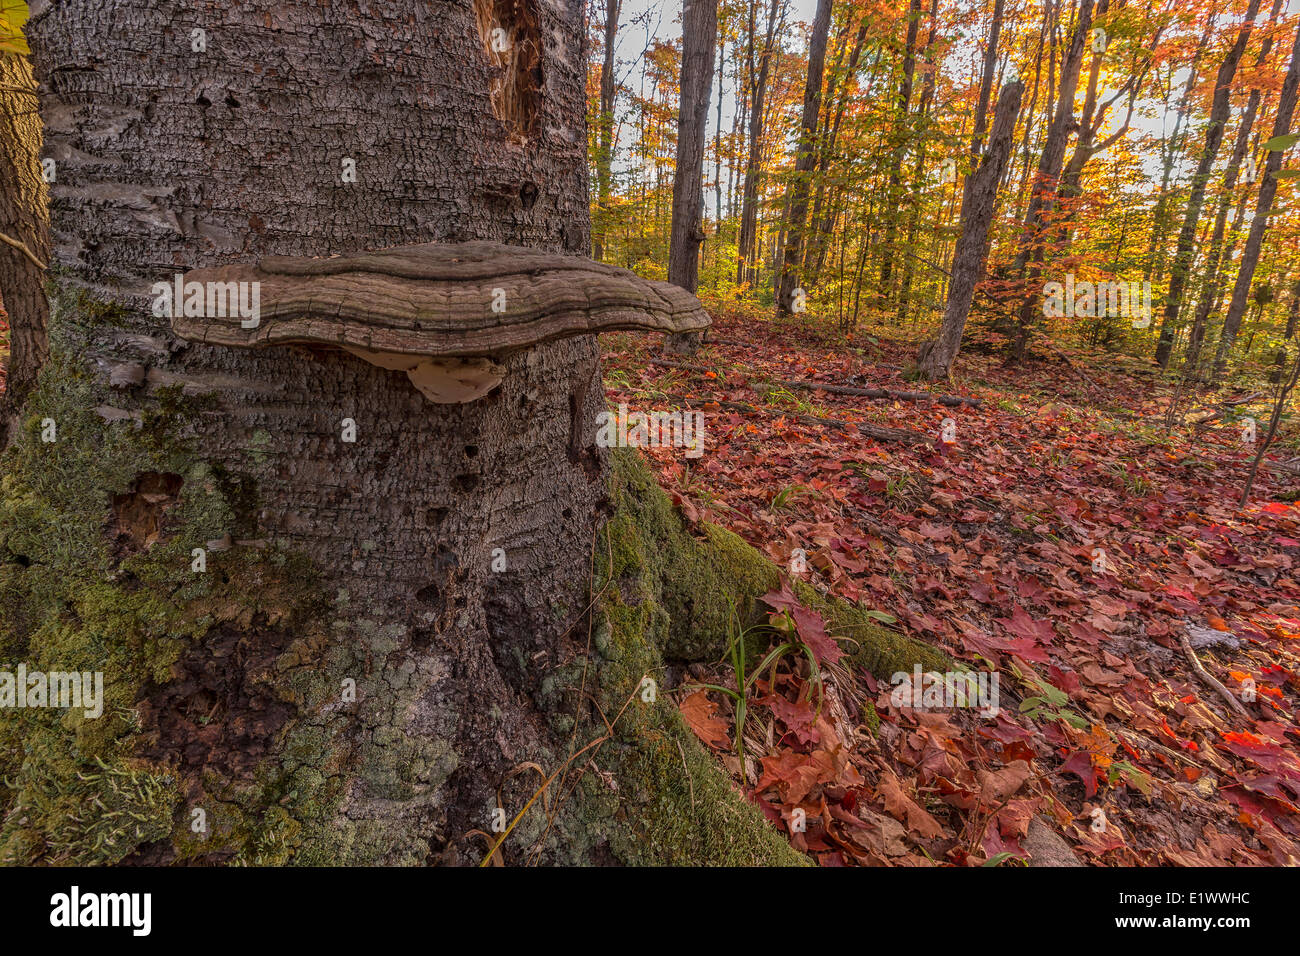 Large fungus on a stump with autumn leaves all over the ground. The colourful leaves maple aspen trees are seen in the distance Stock Photo